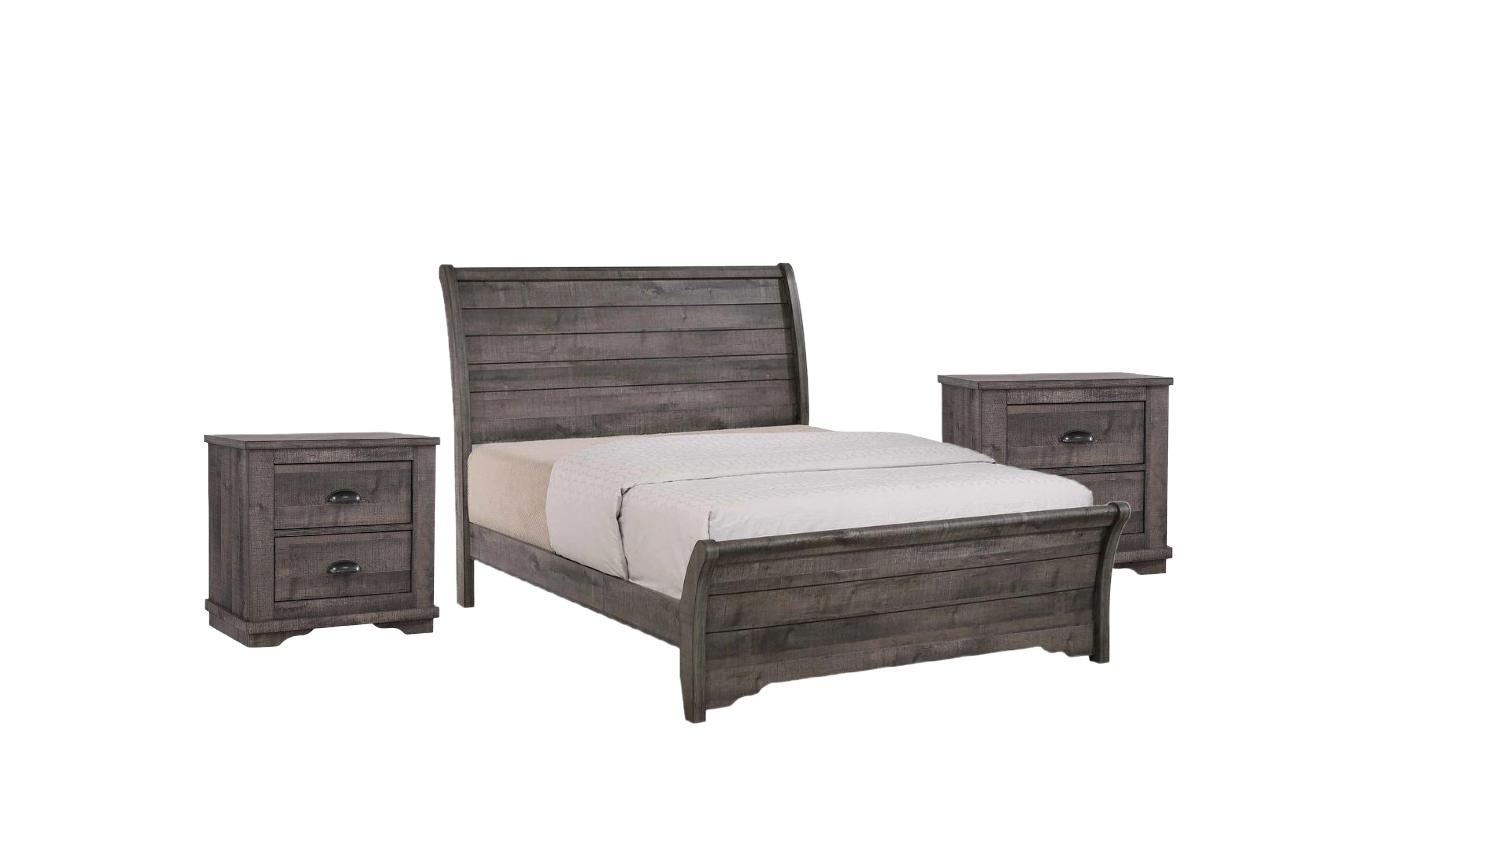 Traditional, Rustic Panel Bedroom Set Coralee B8100-Q-Bed-3pcs in Gray 